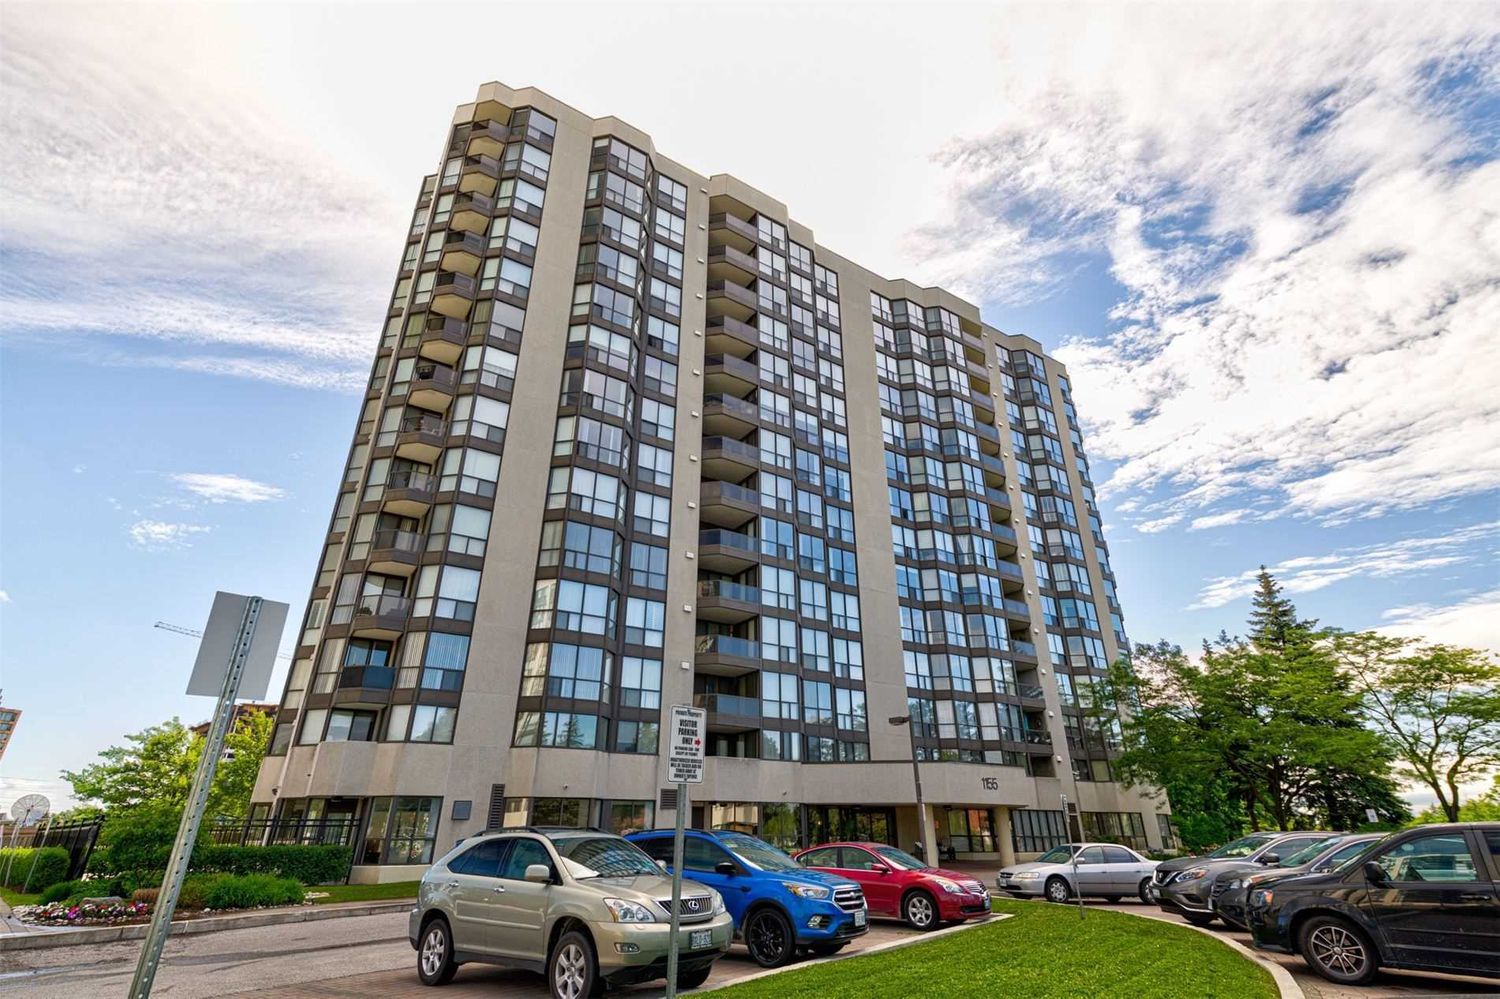 1155 Bough Beeches Boulevard. Orchard Place II Condos is located in  Mississauga, Toronto - image #1 of 2